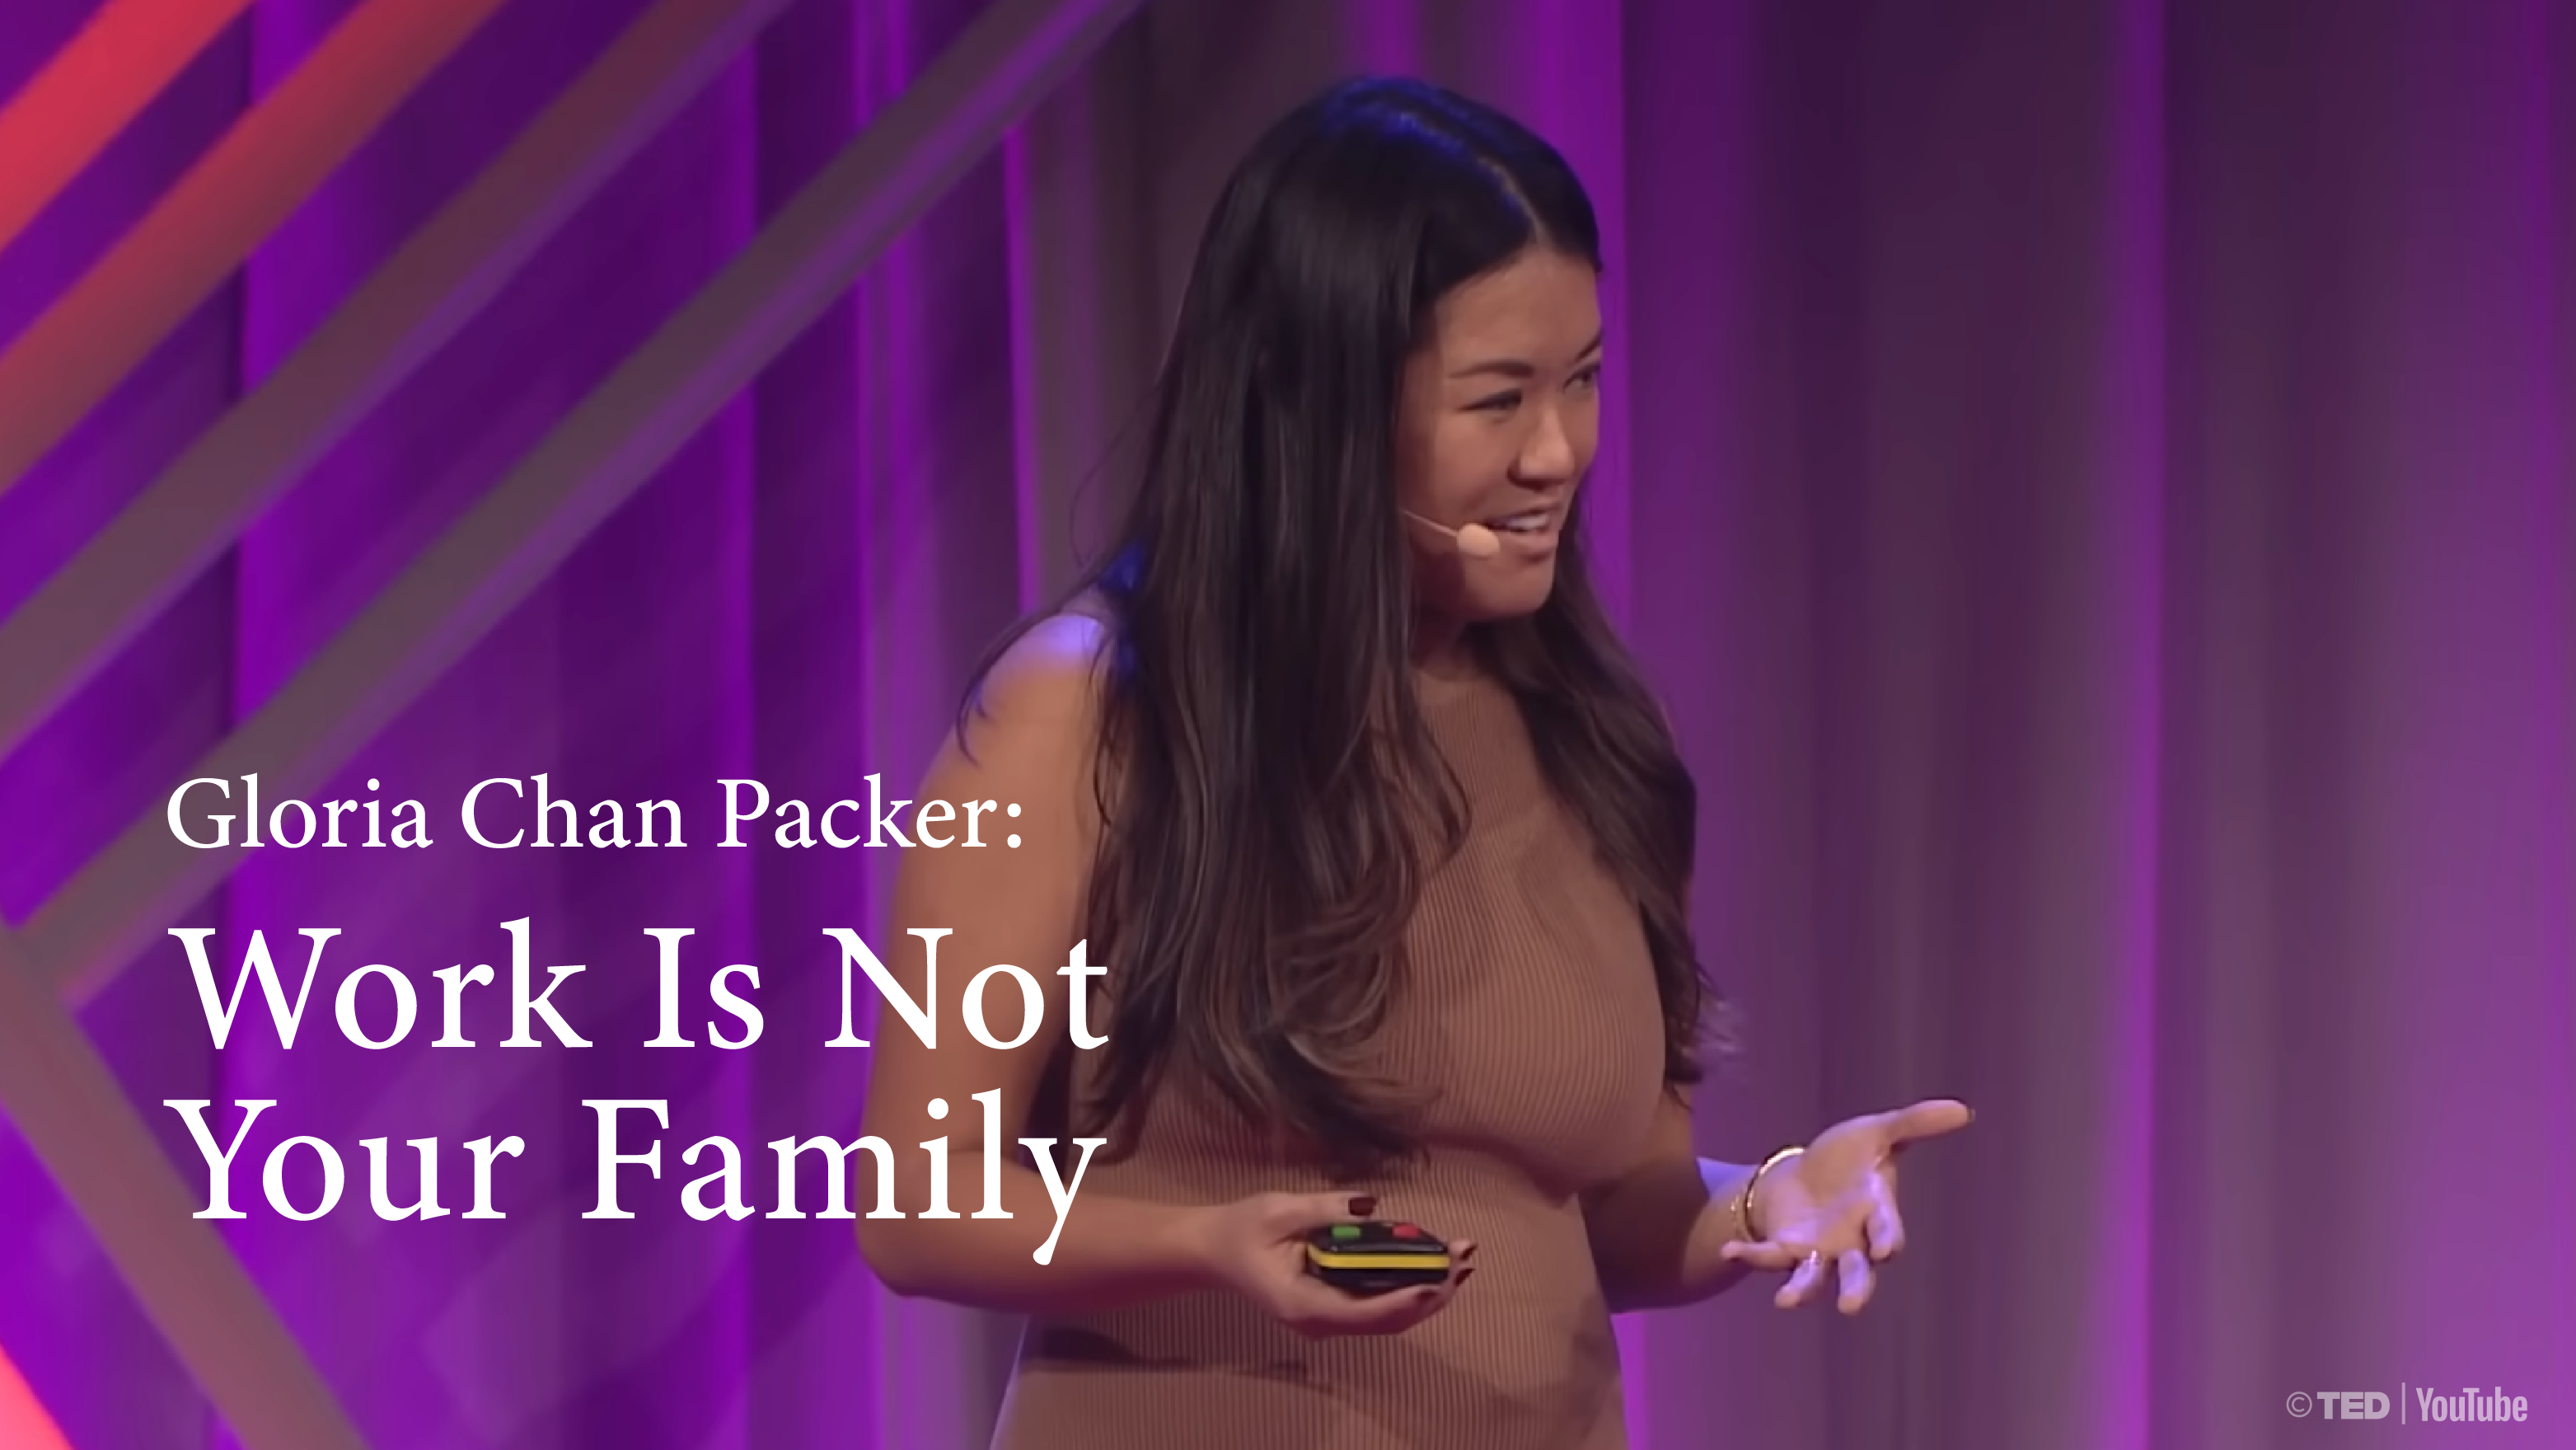 [C+] Work is not your family | Gloria Chan Packer [FULL]